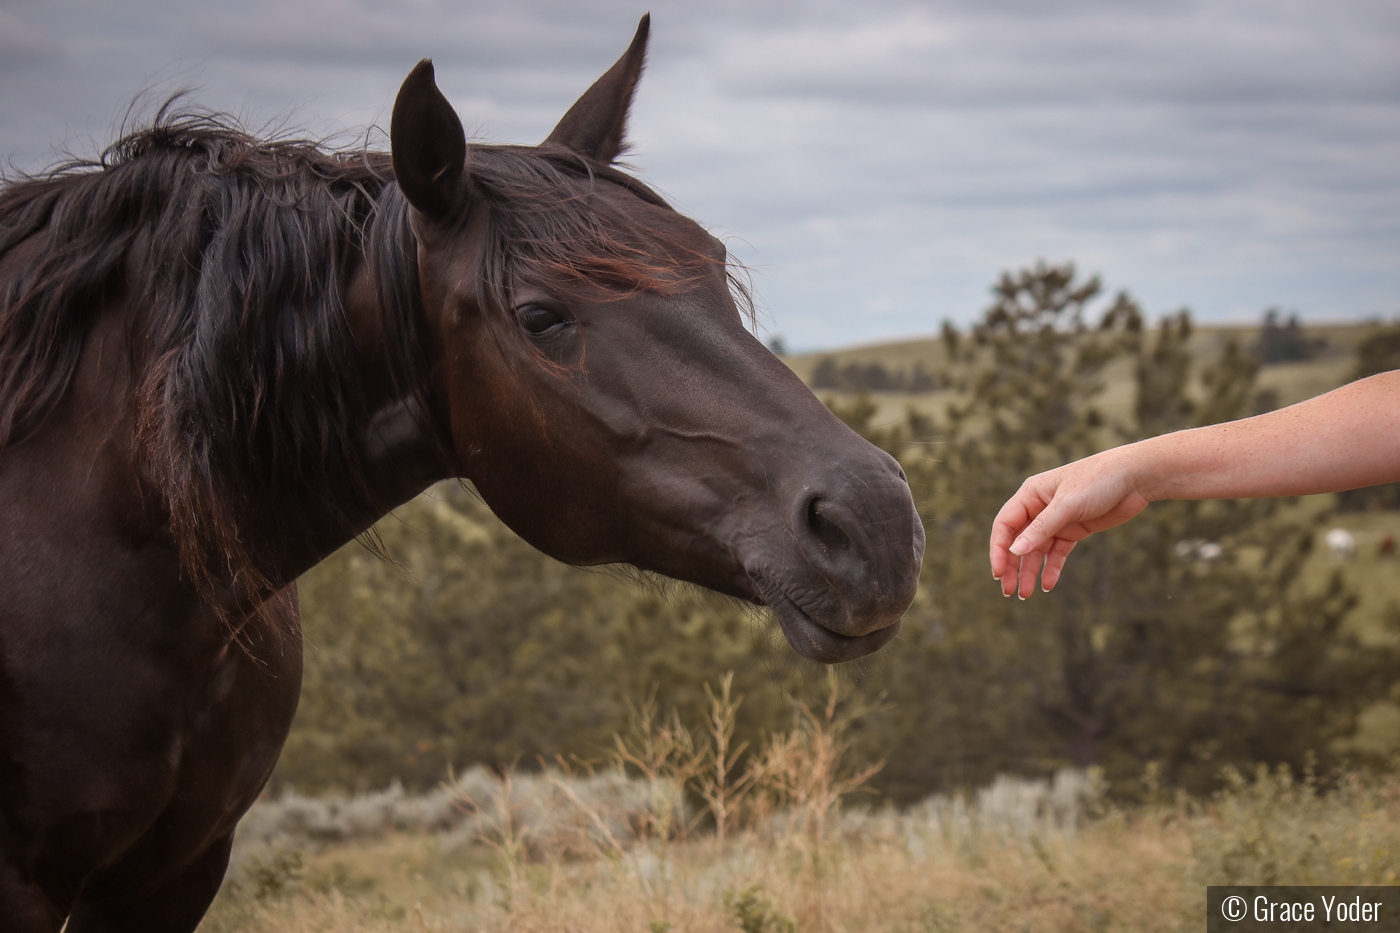 Meeting a Mustang by Grace Yoder